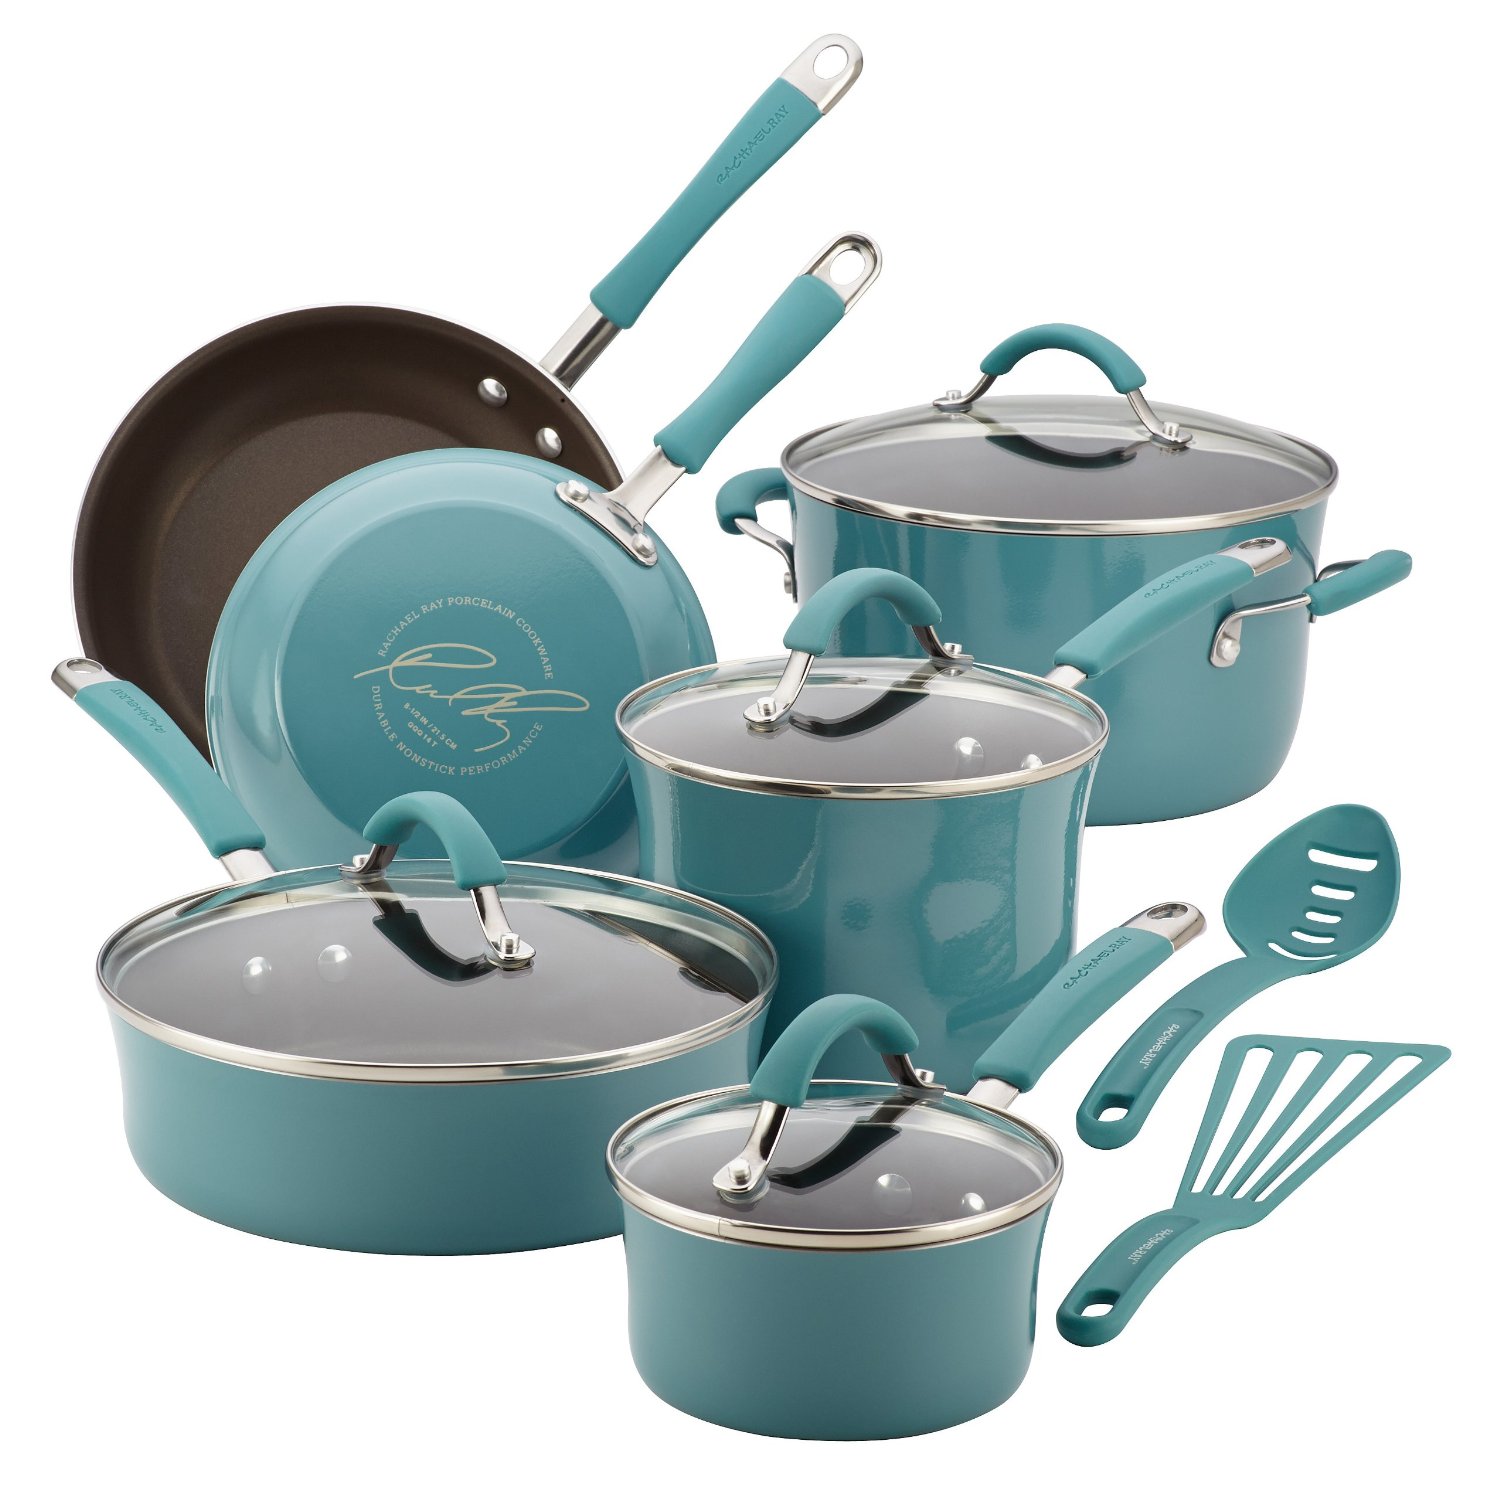 Top 10 Best Cookware Sets Review Top Rated Cookware Sets 2016